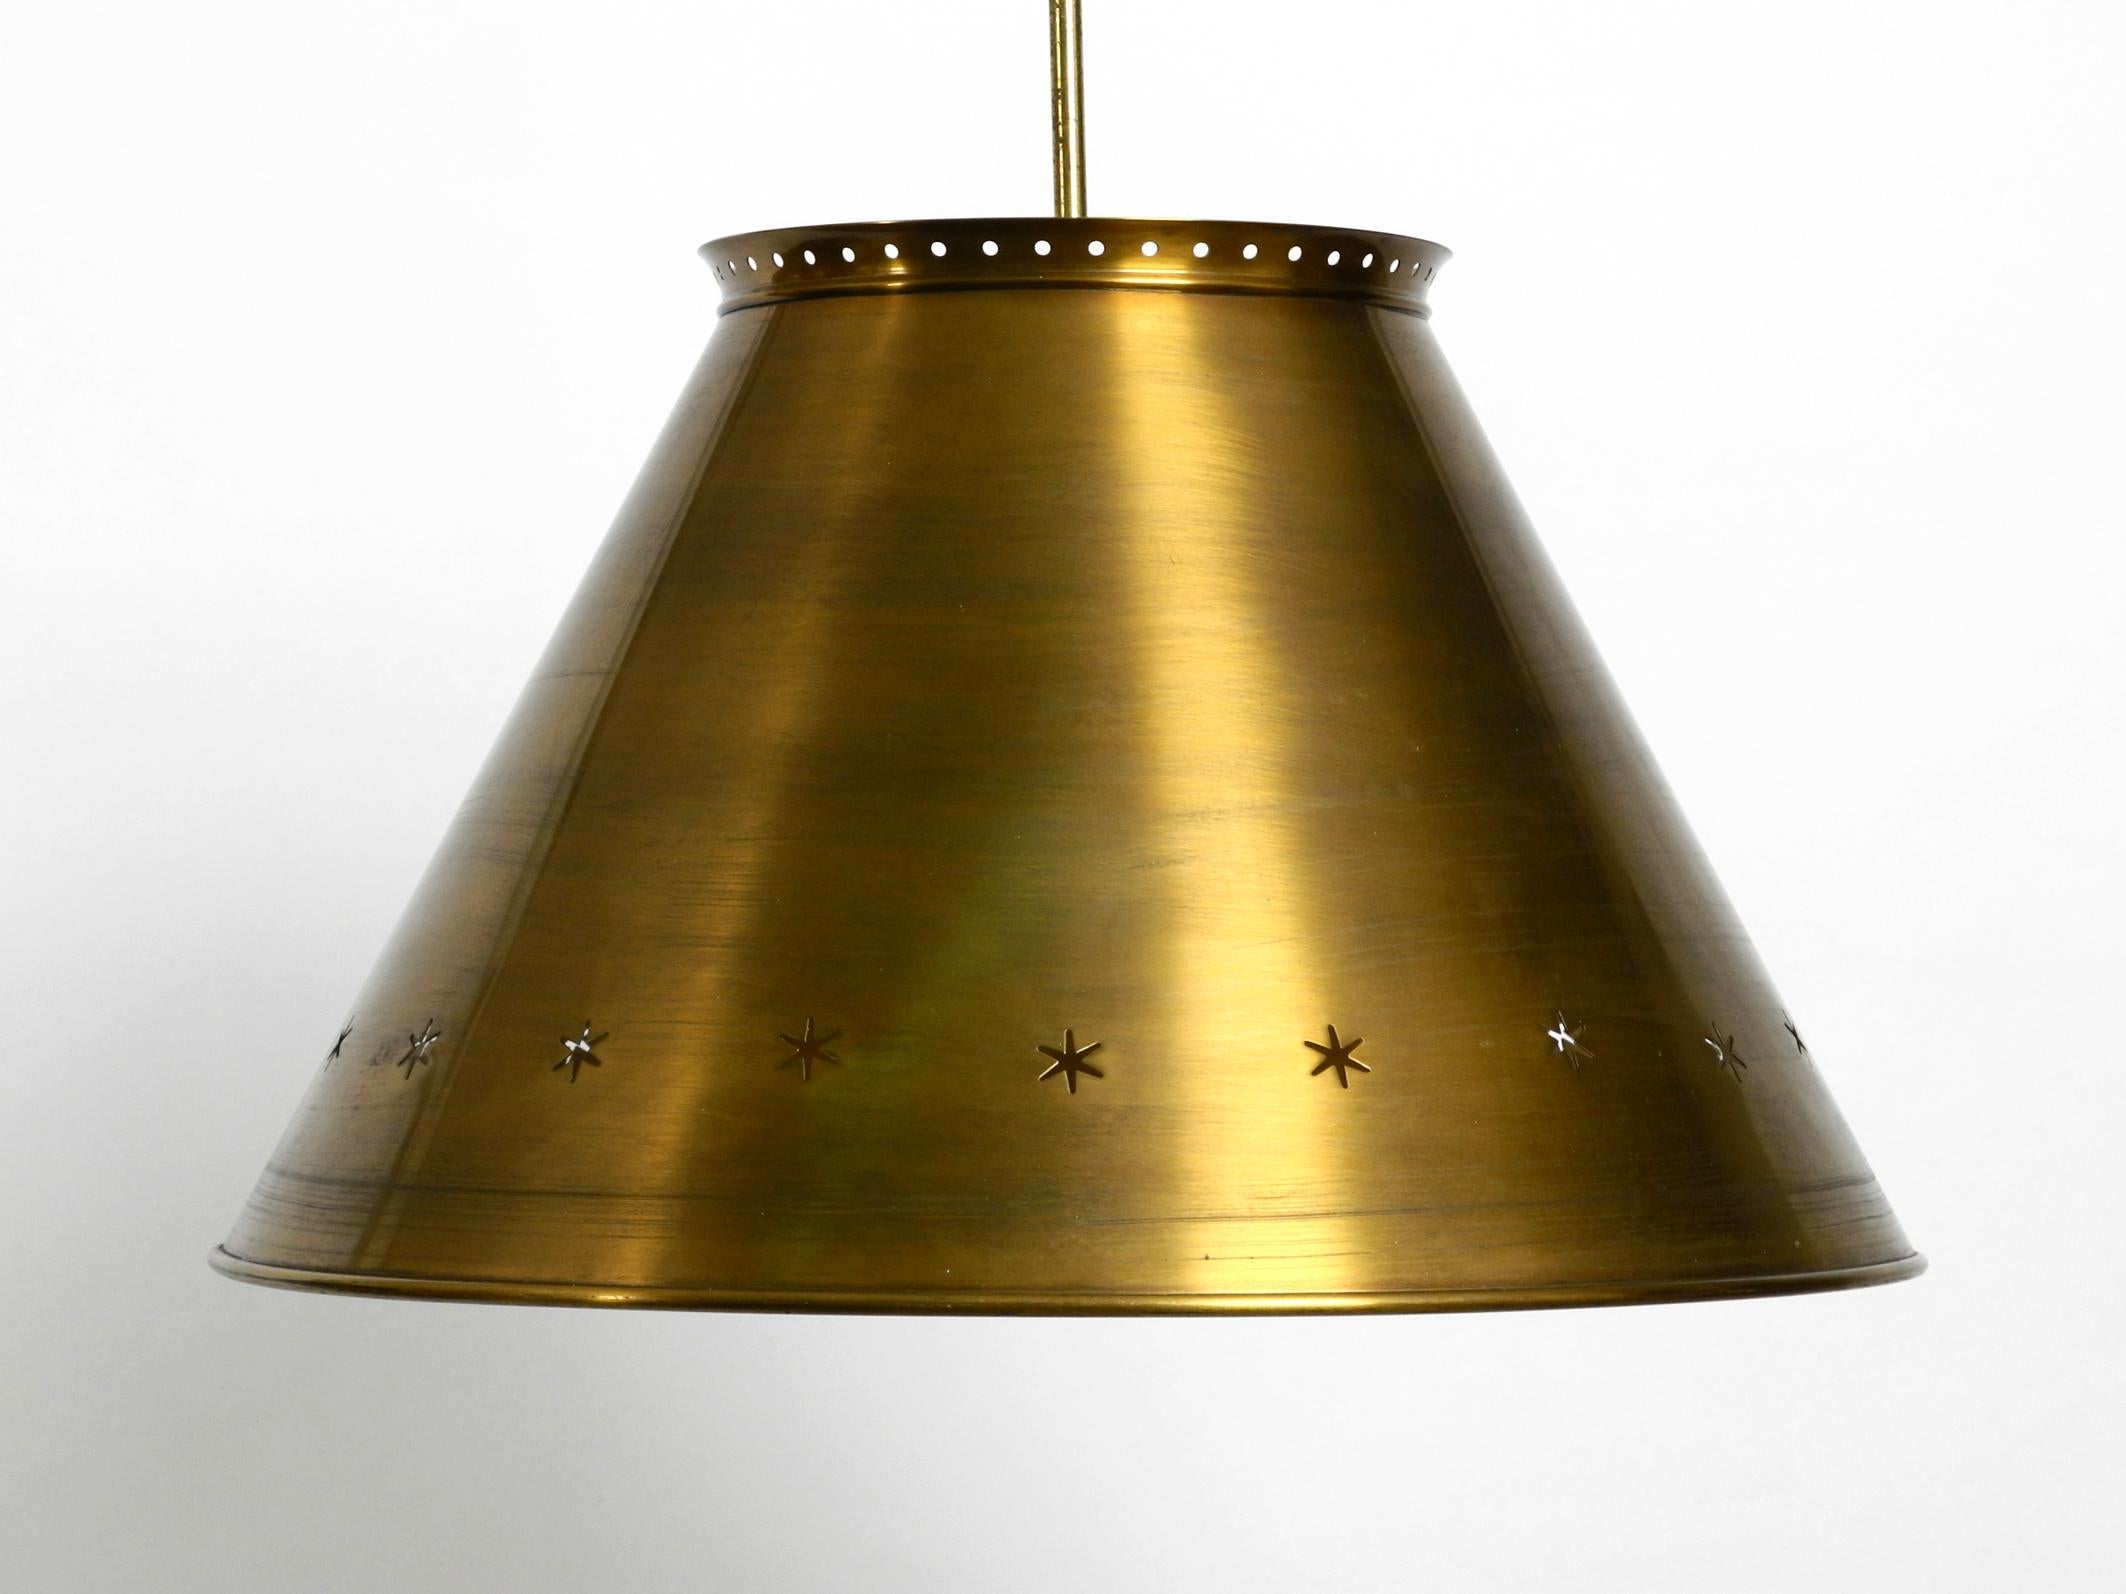 Great Italian XXL mid century brass ceiling lamp.
Beautiful minimalist design with lots of details. Completely made of brass.
Long rod and canopy also made of brass.
Creates very nice pleasant warm light.
Very good vintage condition with no